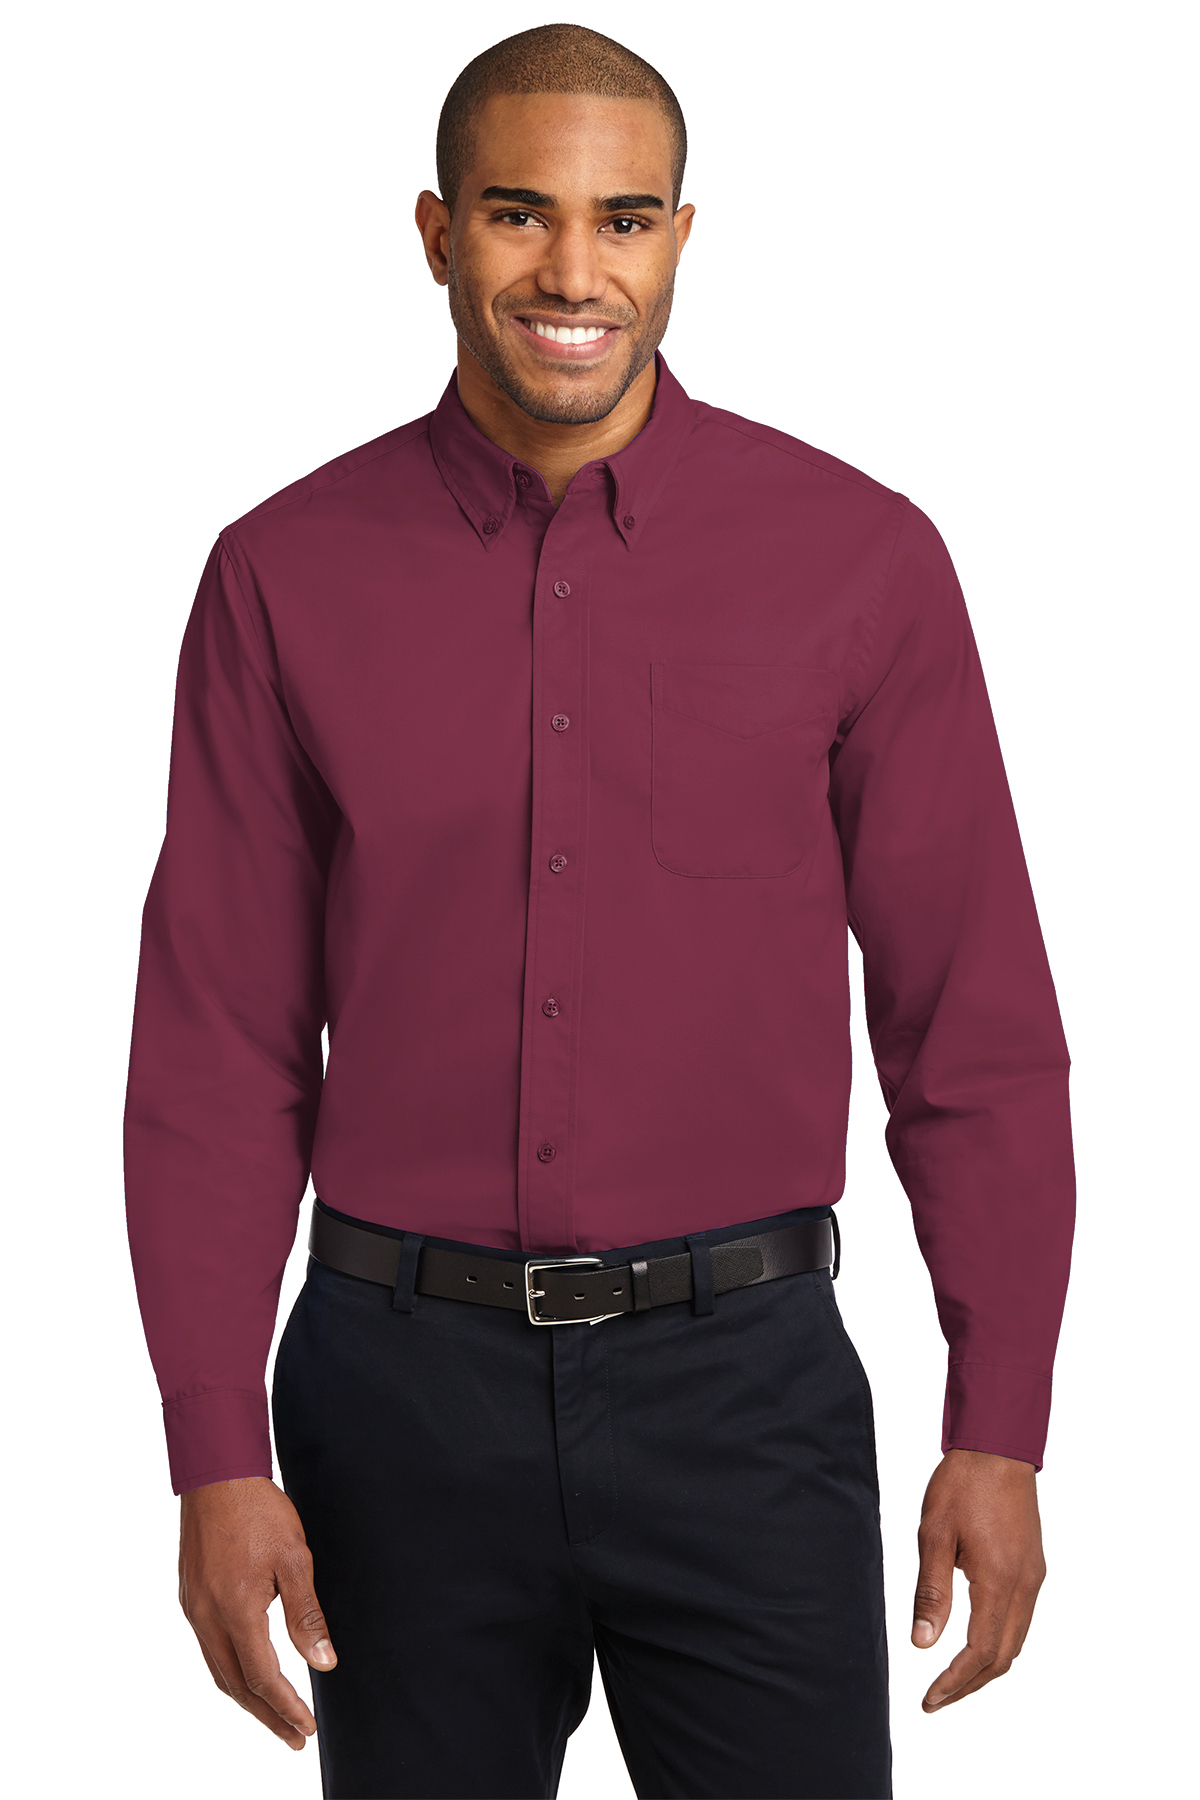 Care Port Sleeve Shirt | Authority Port Easy Authority Long | Product